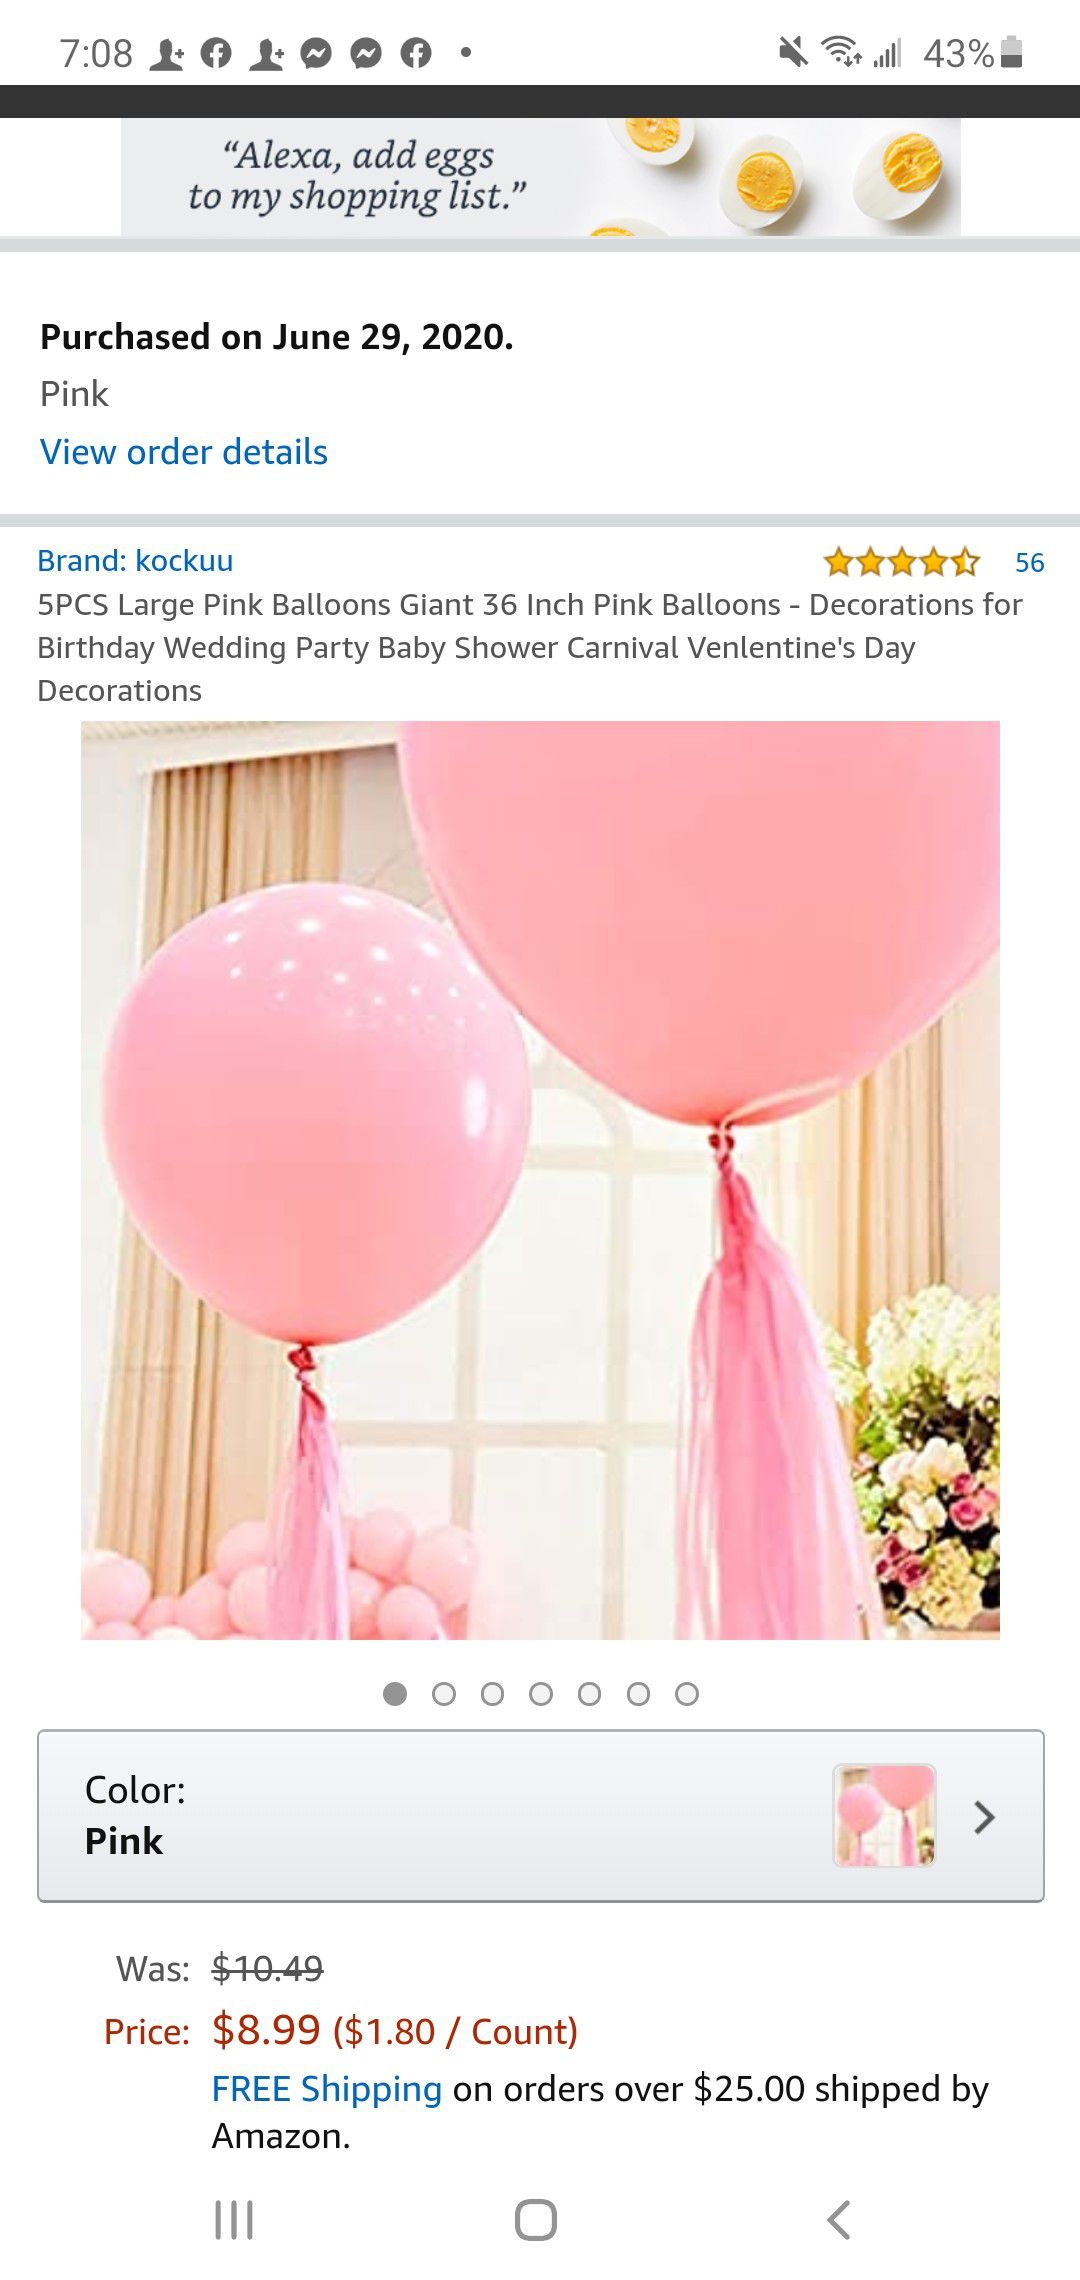 5 pcs pink large Balloons for sale